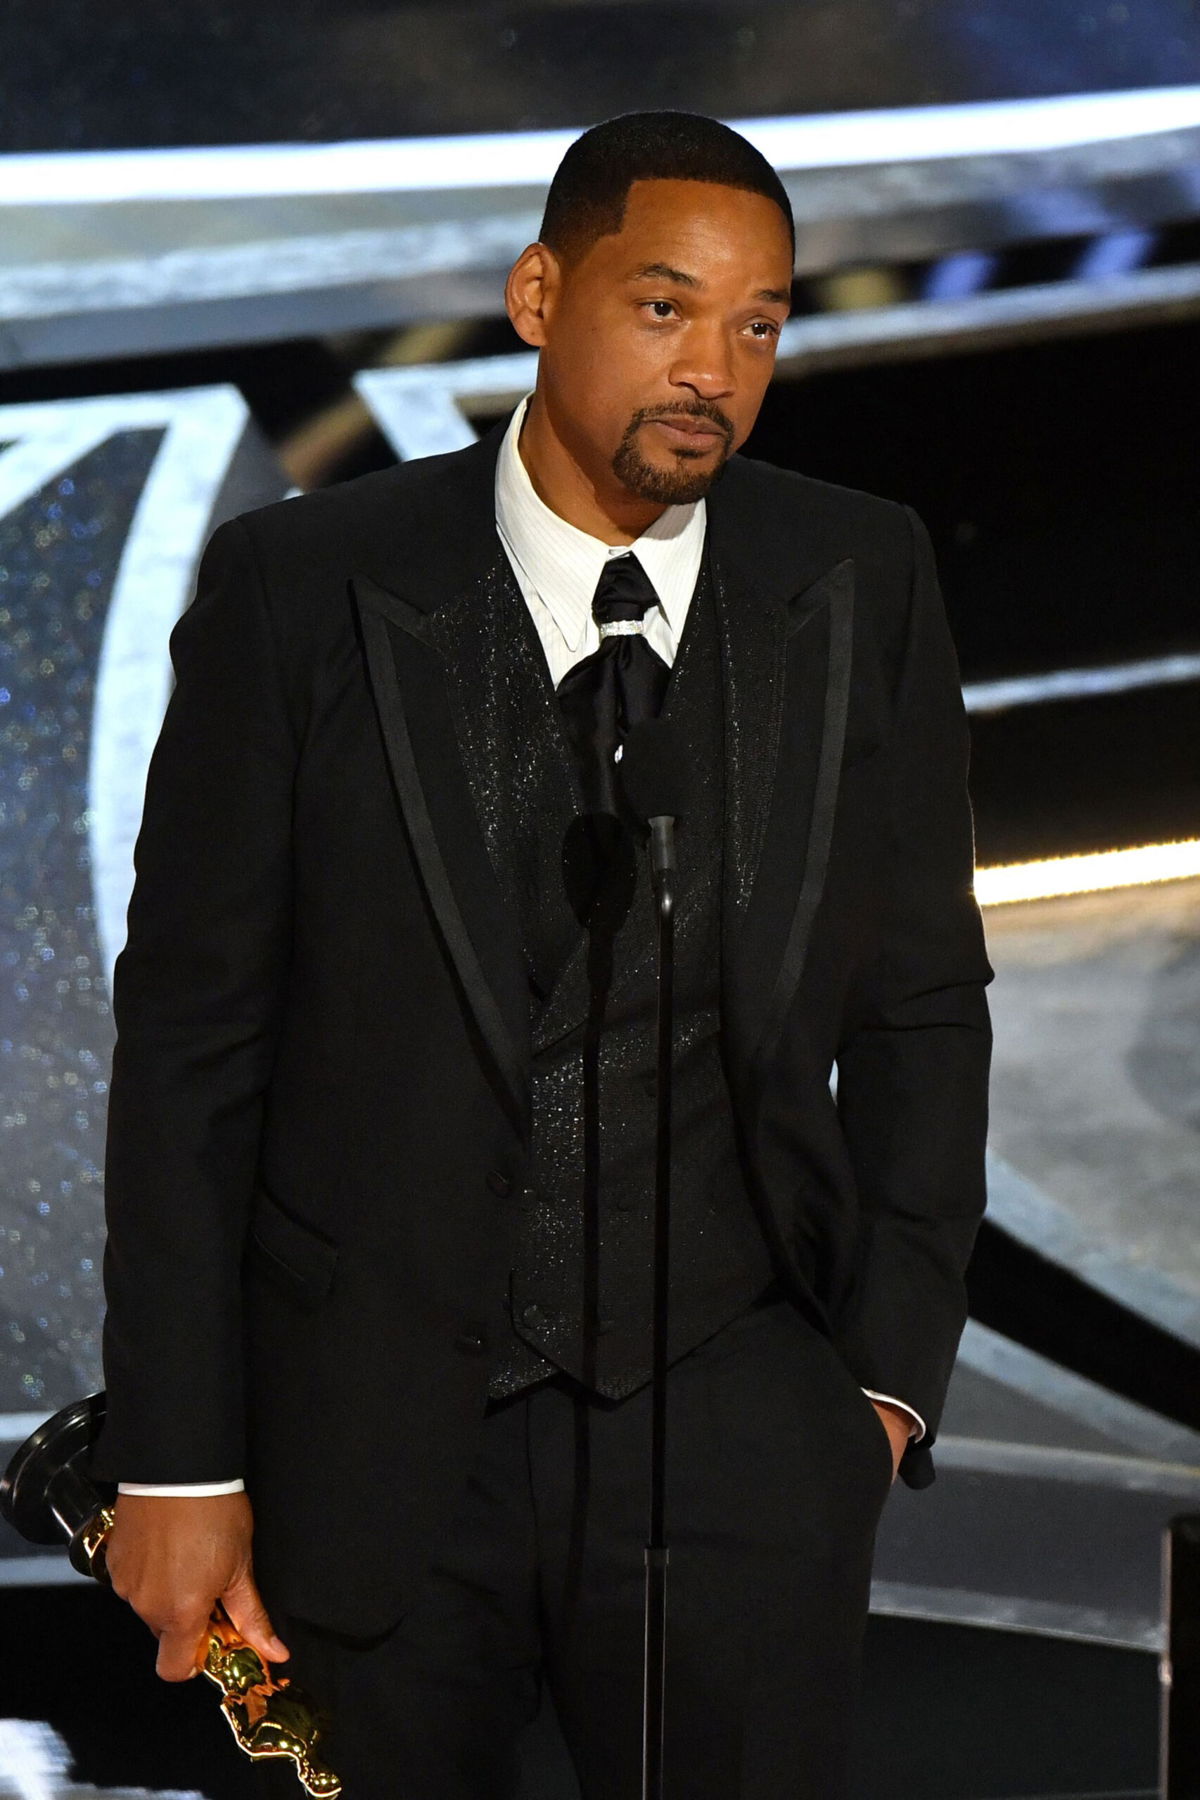 <i>Robyn Beck/AFP/Getty Images</i><br/>Will Smith will not be allowed to attend the Academy Awards for the next 10 years